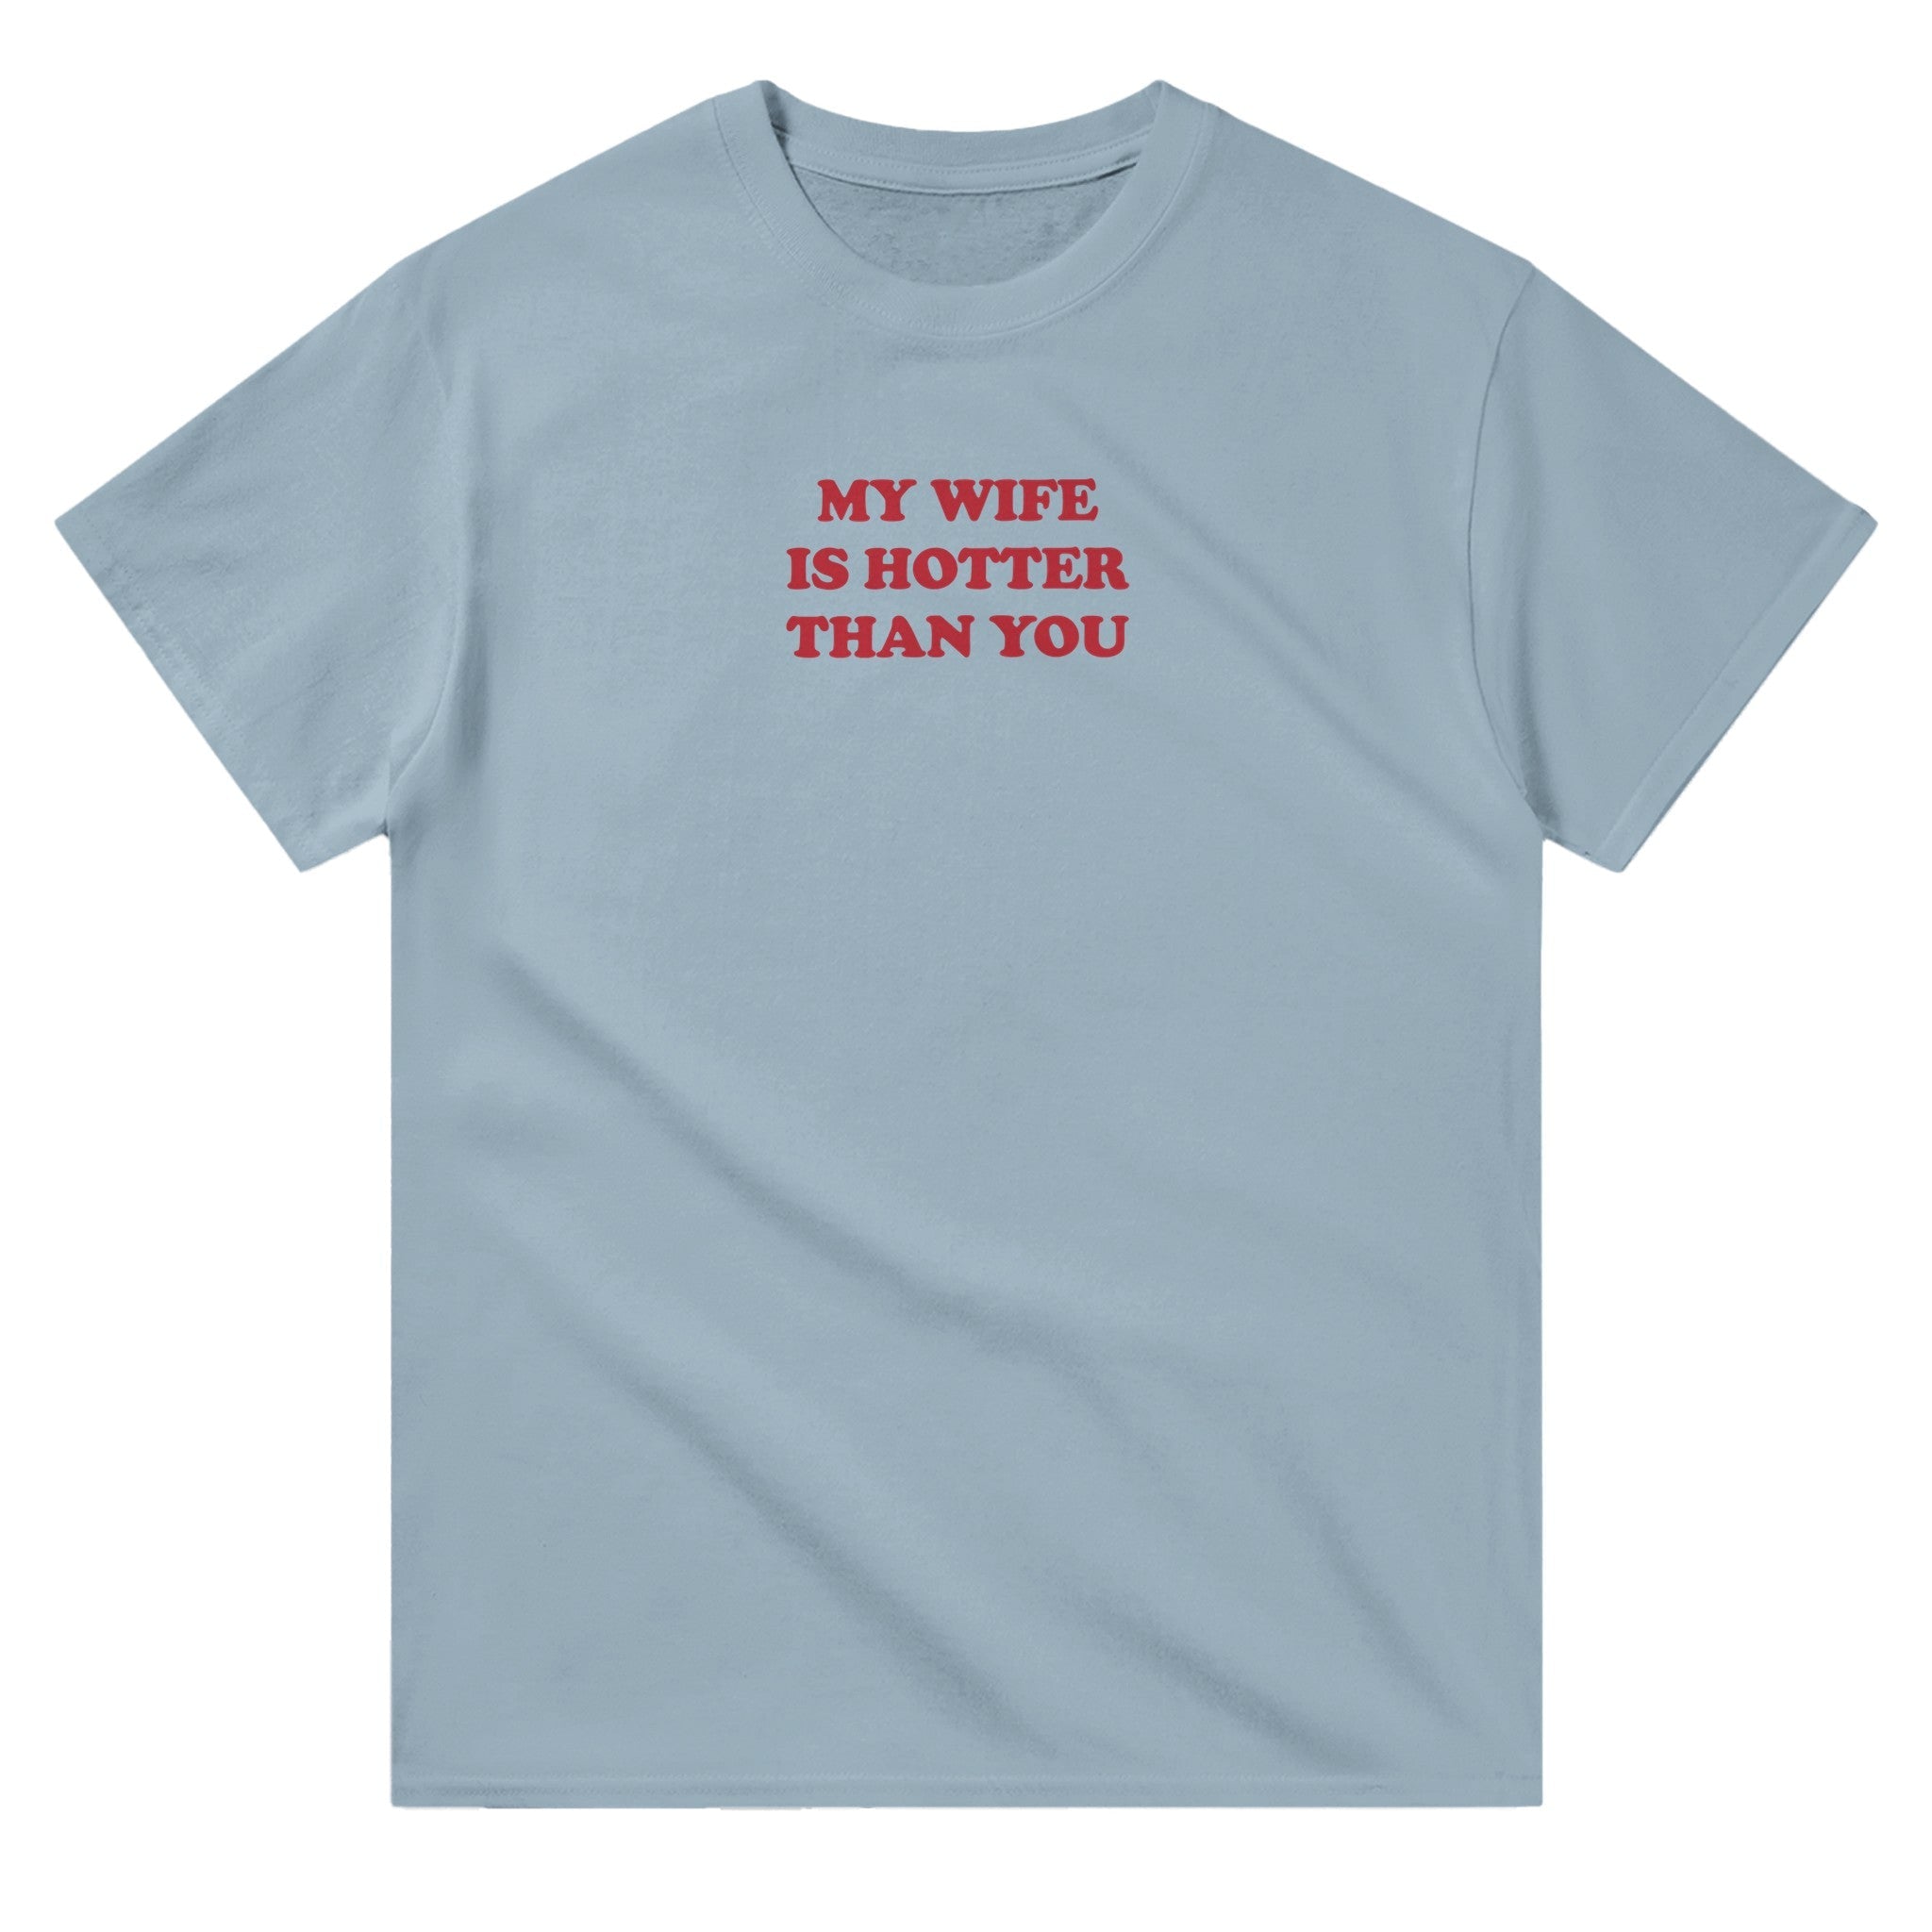 'My Wife is Hotter Than You' classic tee - In Print We Trust